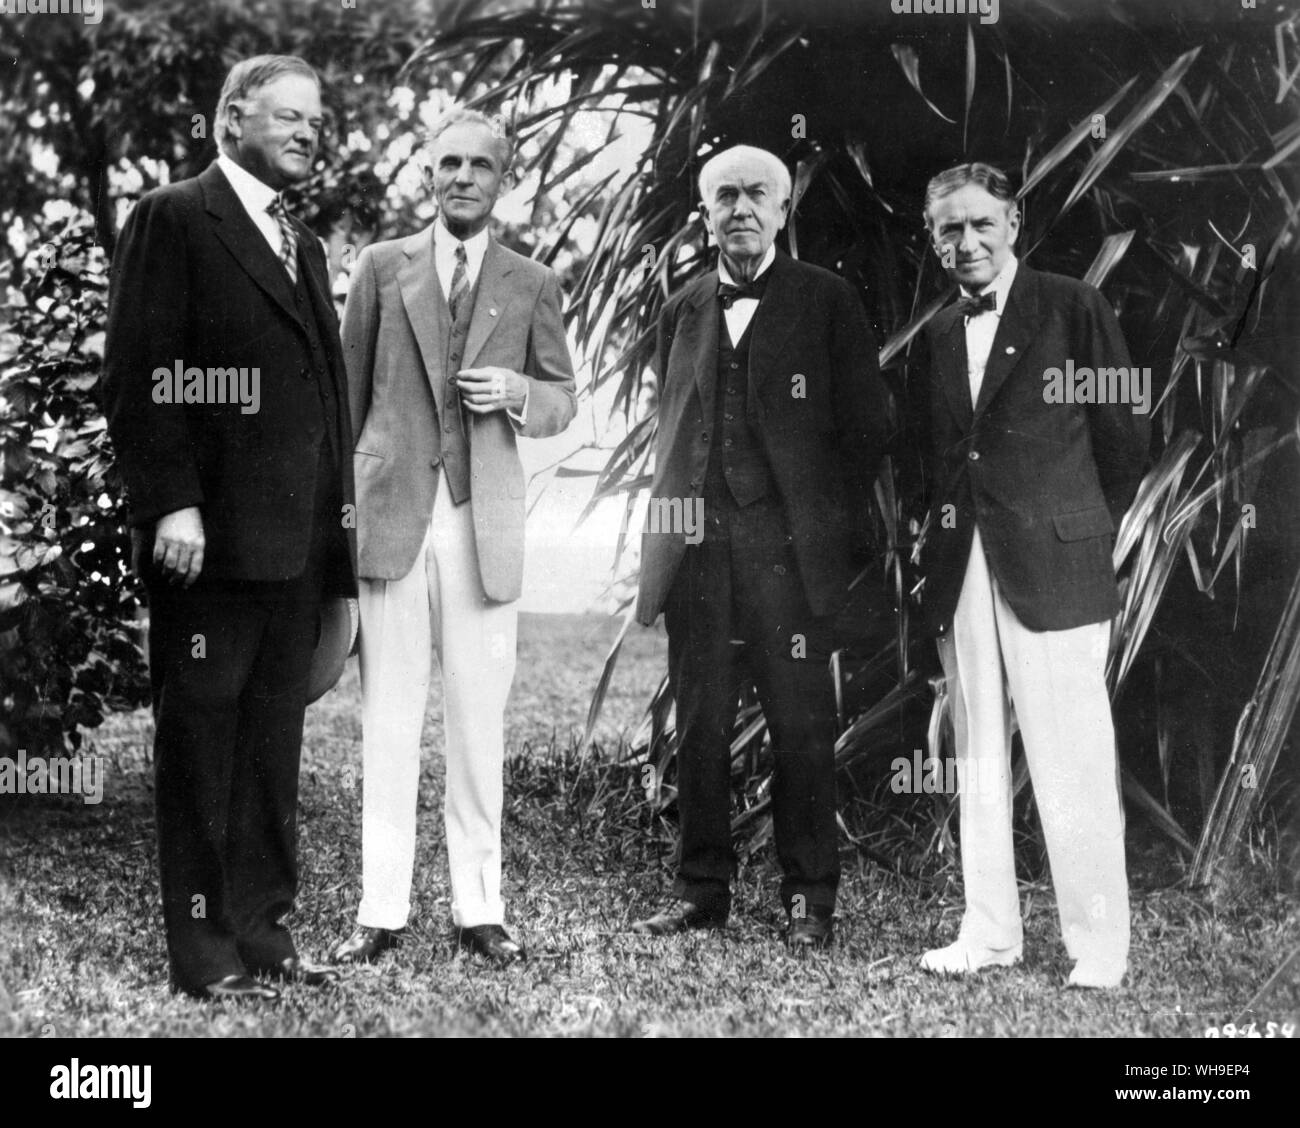 Feb 11th 1929: (l-r) President Herbert Hoover (1874-1964), Henry Ford, Thomas Edison and Harvey Firestone at Mr Edison's home, Fort Meyers, Florida. Hoover was the 31st President of the USA from 1929-1933. Stock Photo